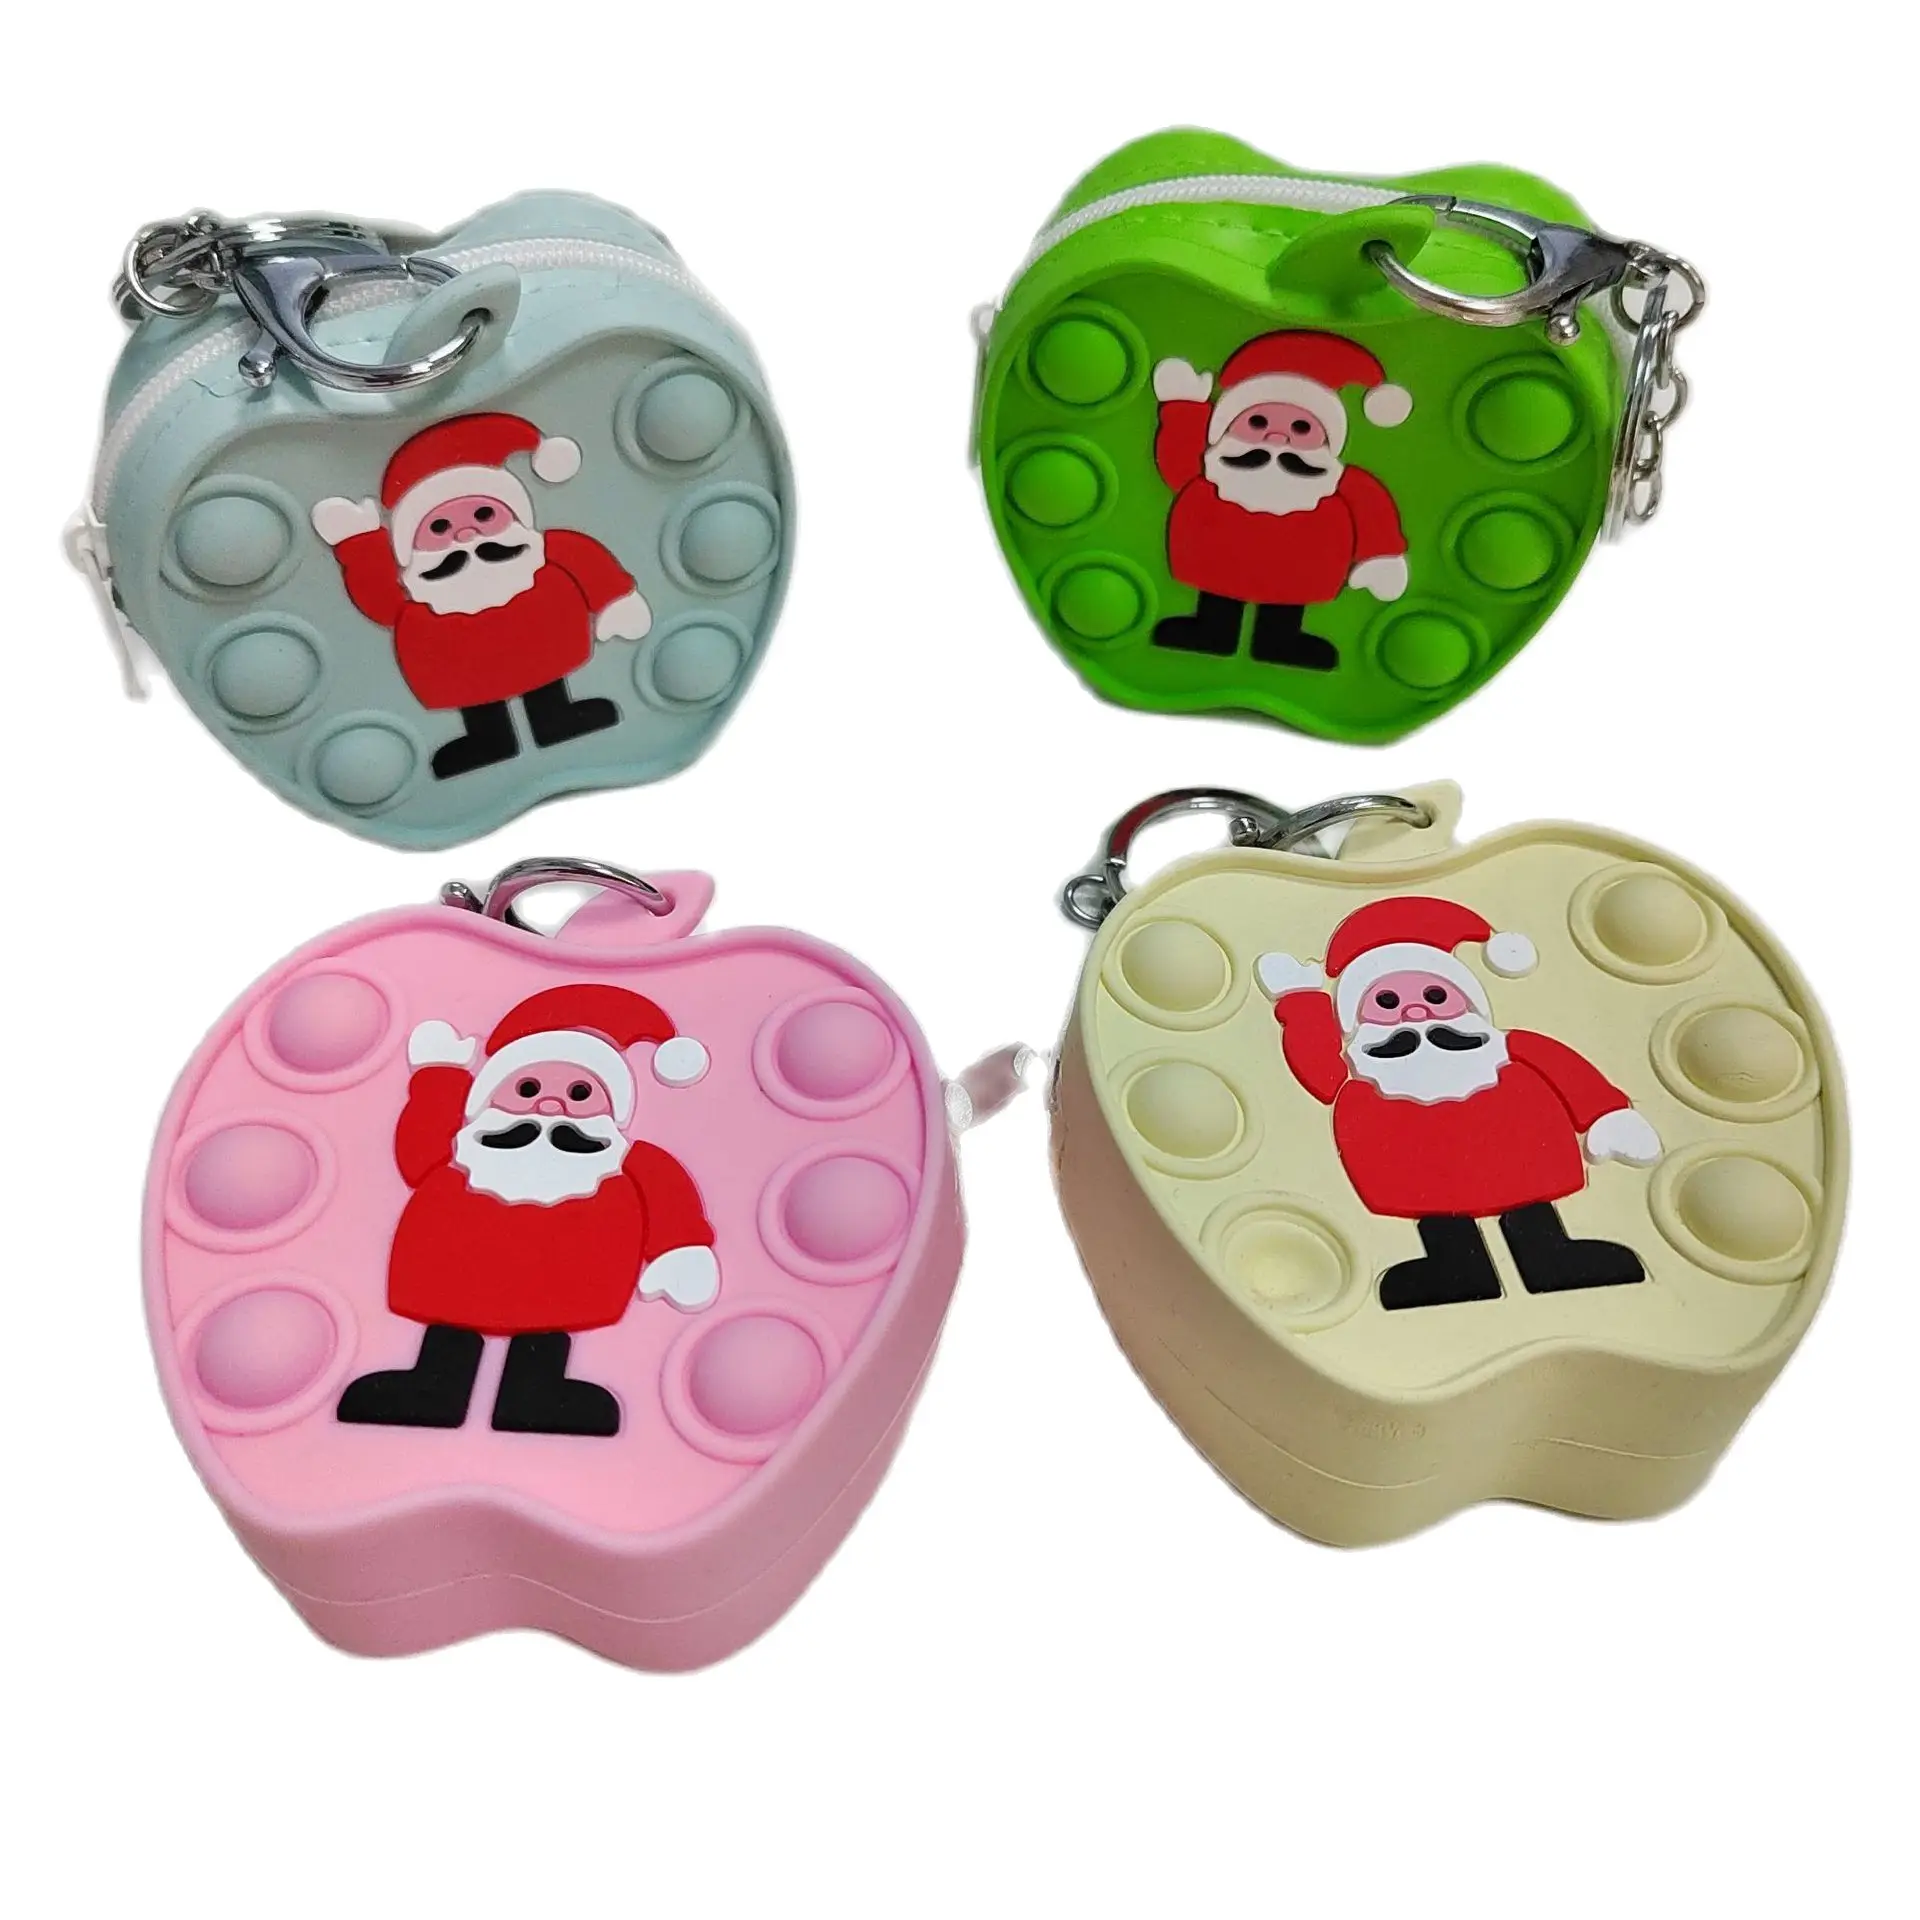 

New Arrival Sensory Popet Silicone Push Bubble Stationery Storage Bag Pop Decompression Coin Purse Fidget Toys Christmas Gift